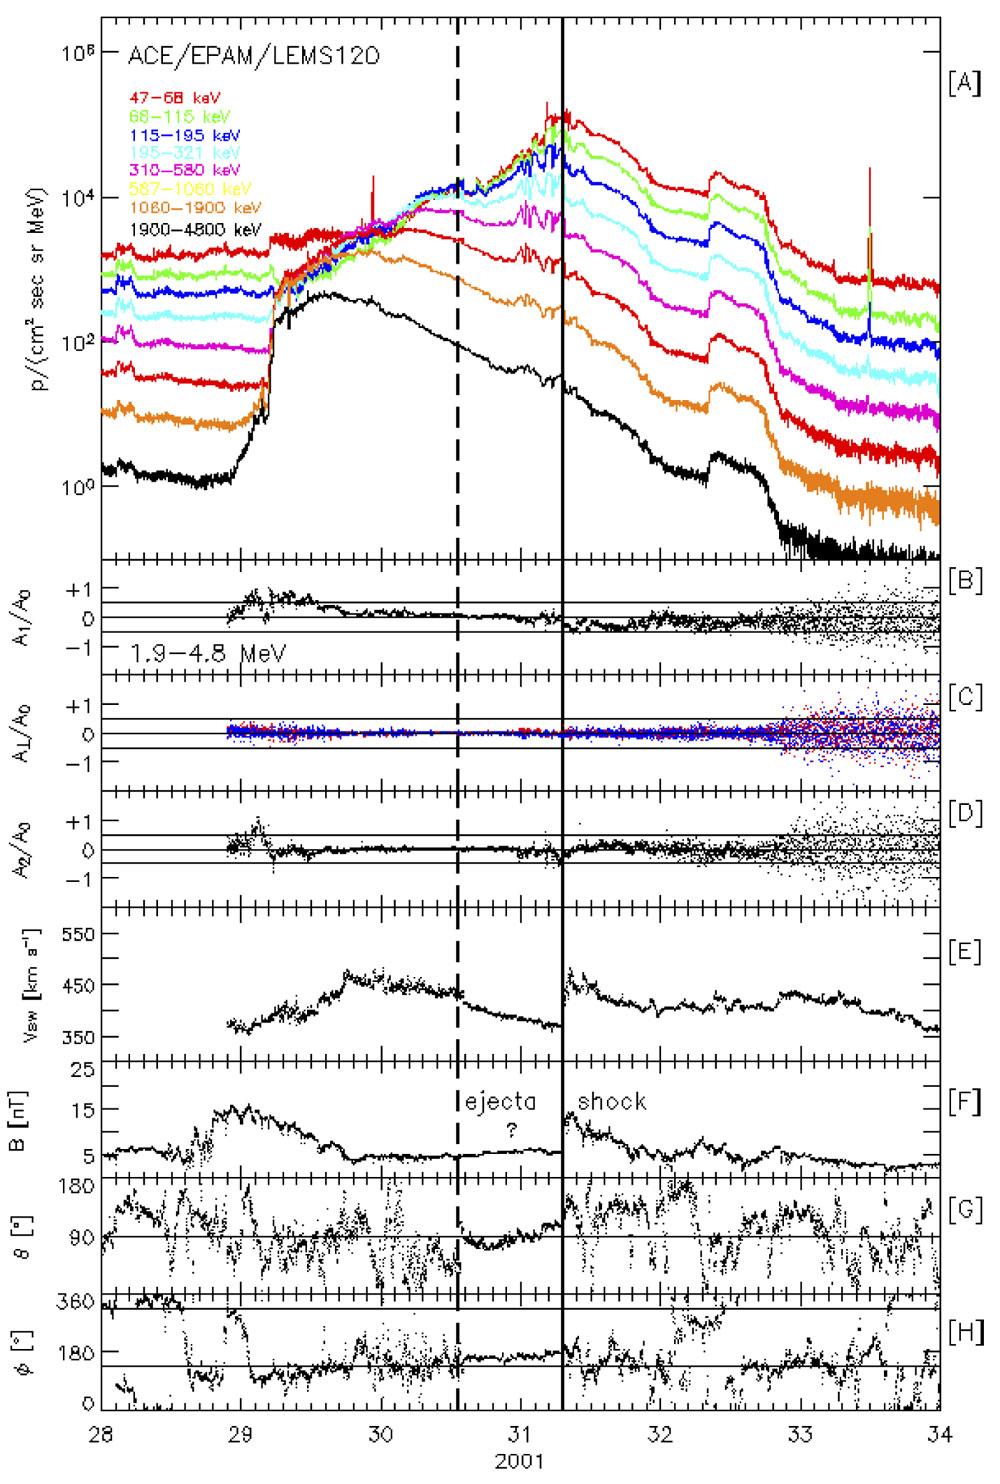 Advanced Composition Explorer (ACE) observations of energetic particles and solar wind